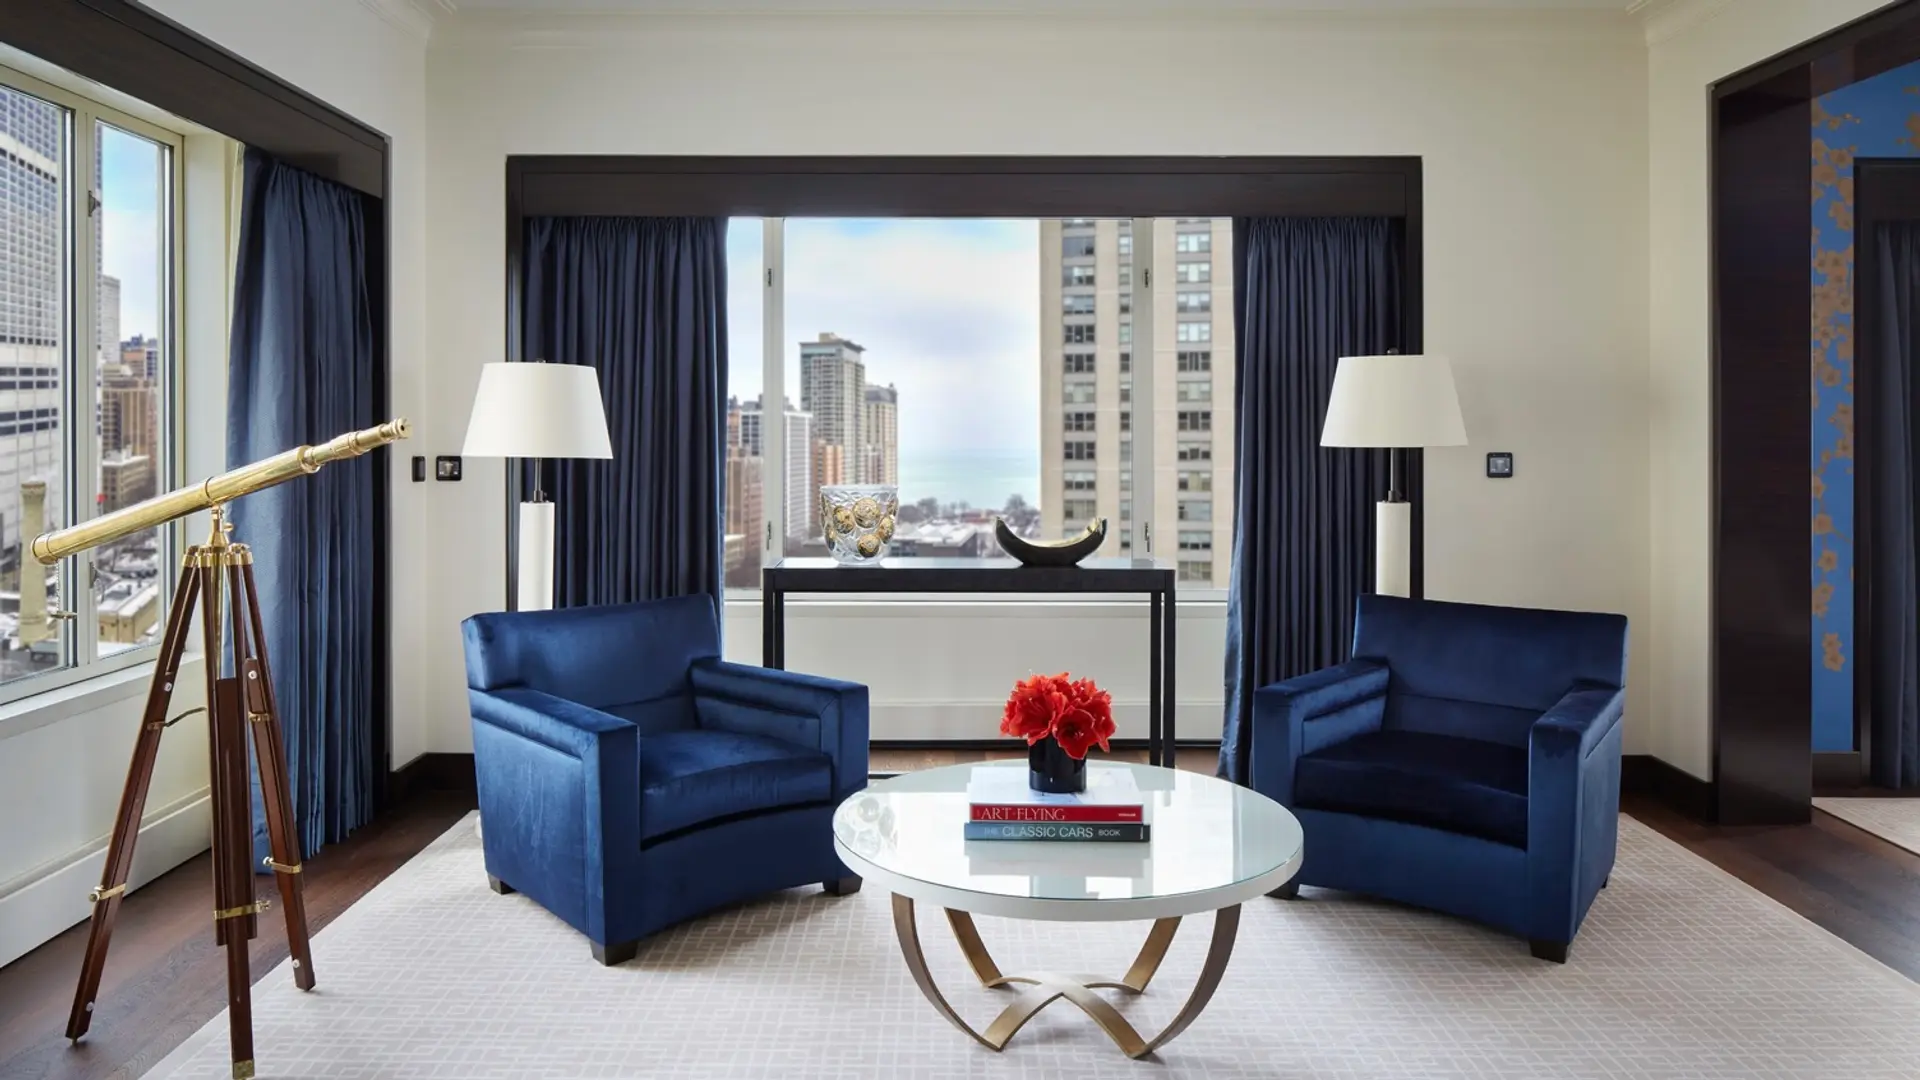 Hotel review Accommodation' - The Peninsula Chicago - 8